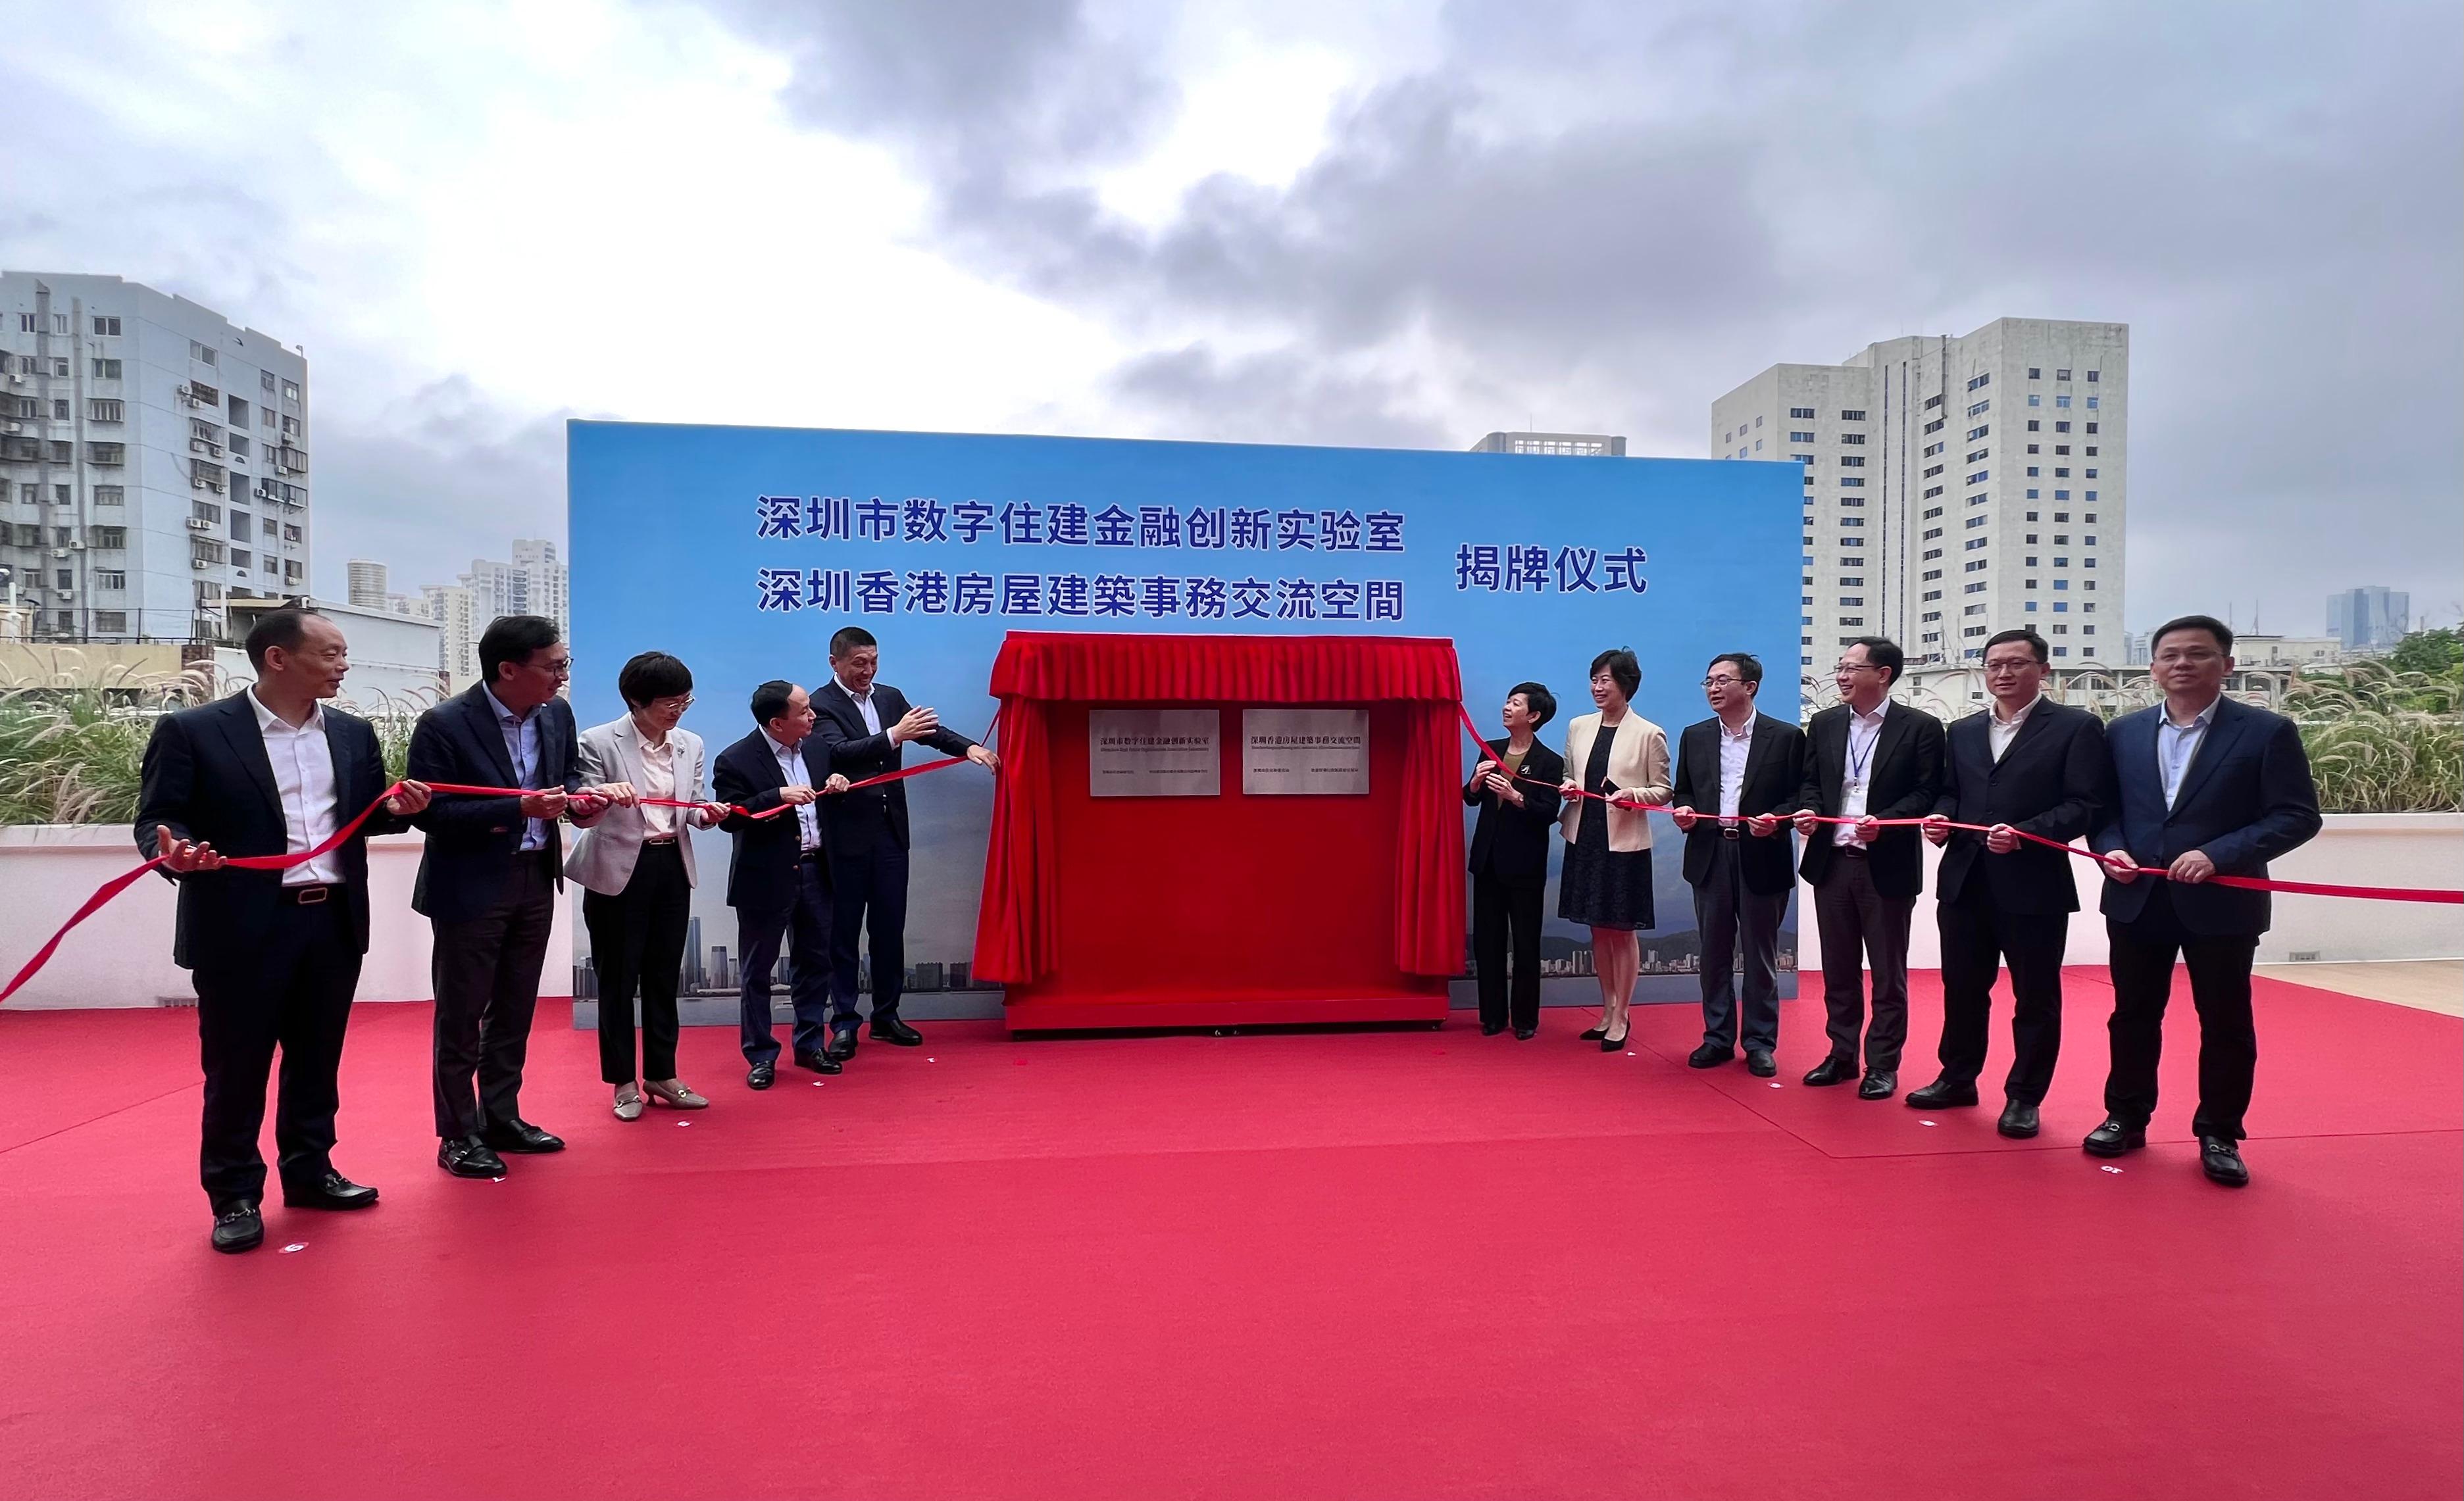 The Secretary for Housing, Ms Winnie Ho, led representatives of the Housing Bureau, the Housing Department and the Architectural Services Department to Shenzhen today (April 3). Photo shows Ms Ho (sixth right), the Party Secretary and Director-General of the Housing and Construction Bureau of Shenzhen Municipality, Mr Xu Songming (fifth left), and relevant officials of the two cities attending the plaque-unveiling ceremony of the Shenzhen Real Estate Digitalization Innovation Laboratory and the Shenzhen Hongkong Housing and Construction Affairs Communication Space.